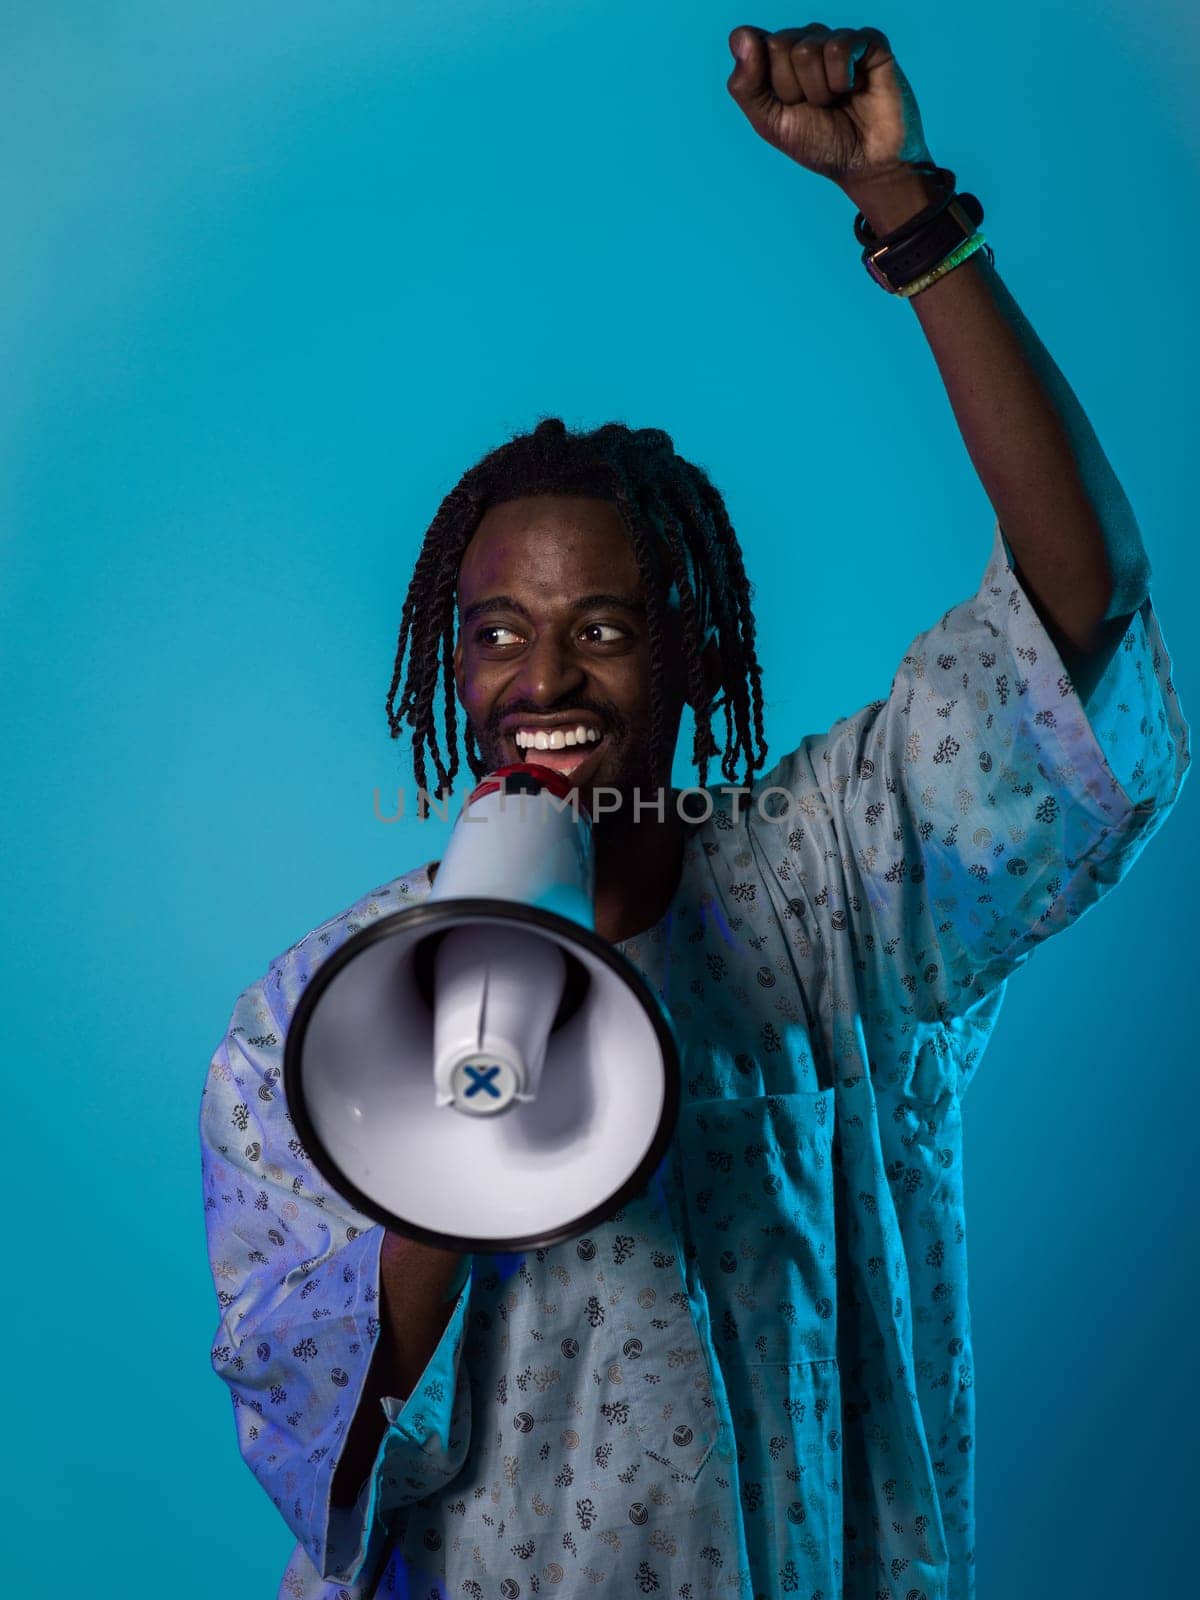 In a powerful and symbolic image, an African American man wears traditional clothing, passionately wields a megaphone against a striking blue background, with his hand raised in the air symbolizing his vocal and cultural empowerment in the pursuit of social justice and equality.